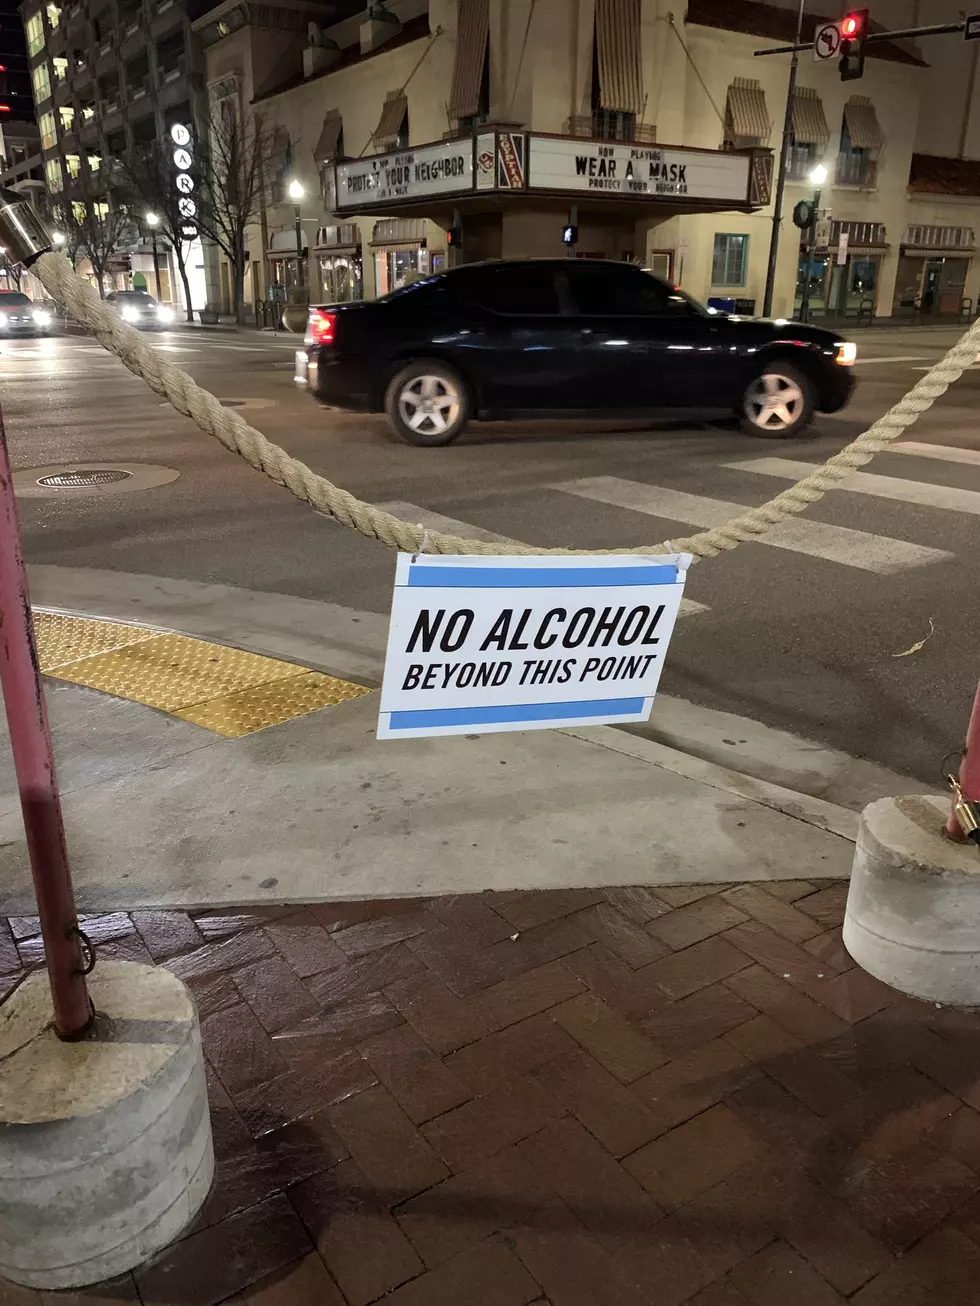 Opinion: Boise Should Allow Alcohol “Beyond This Point”